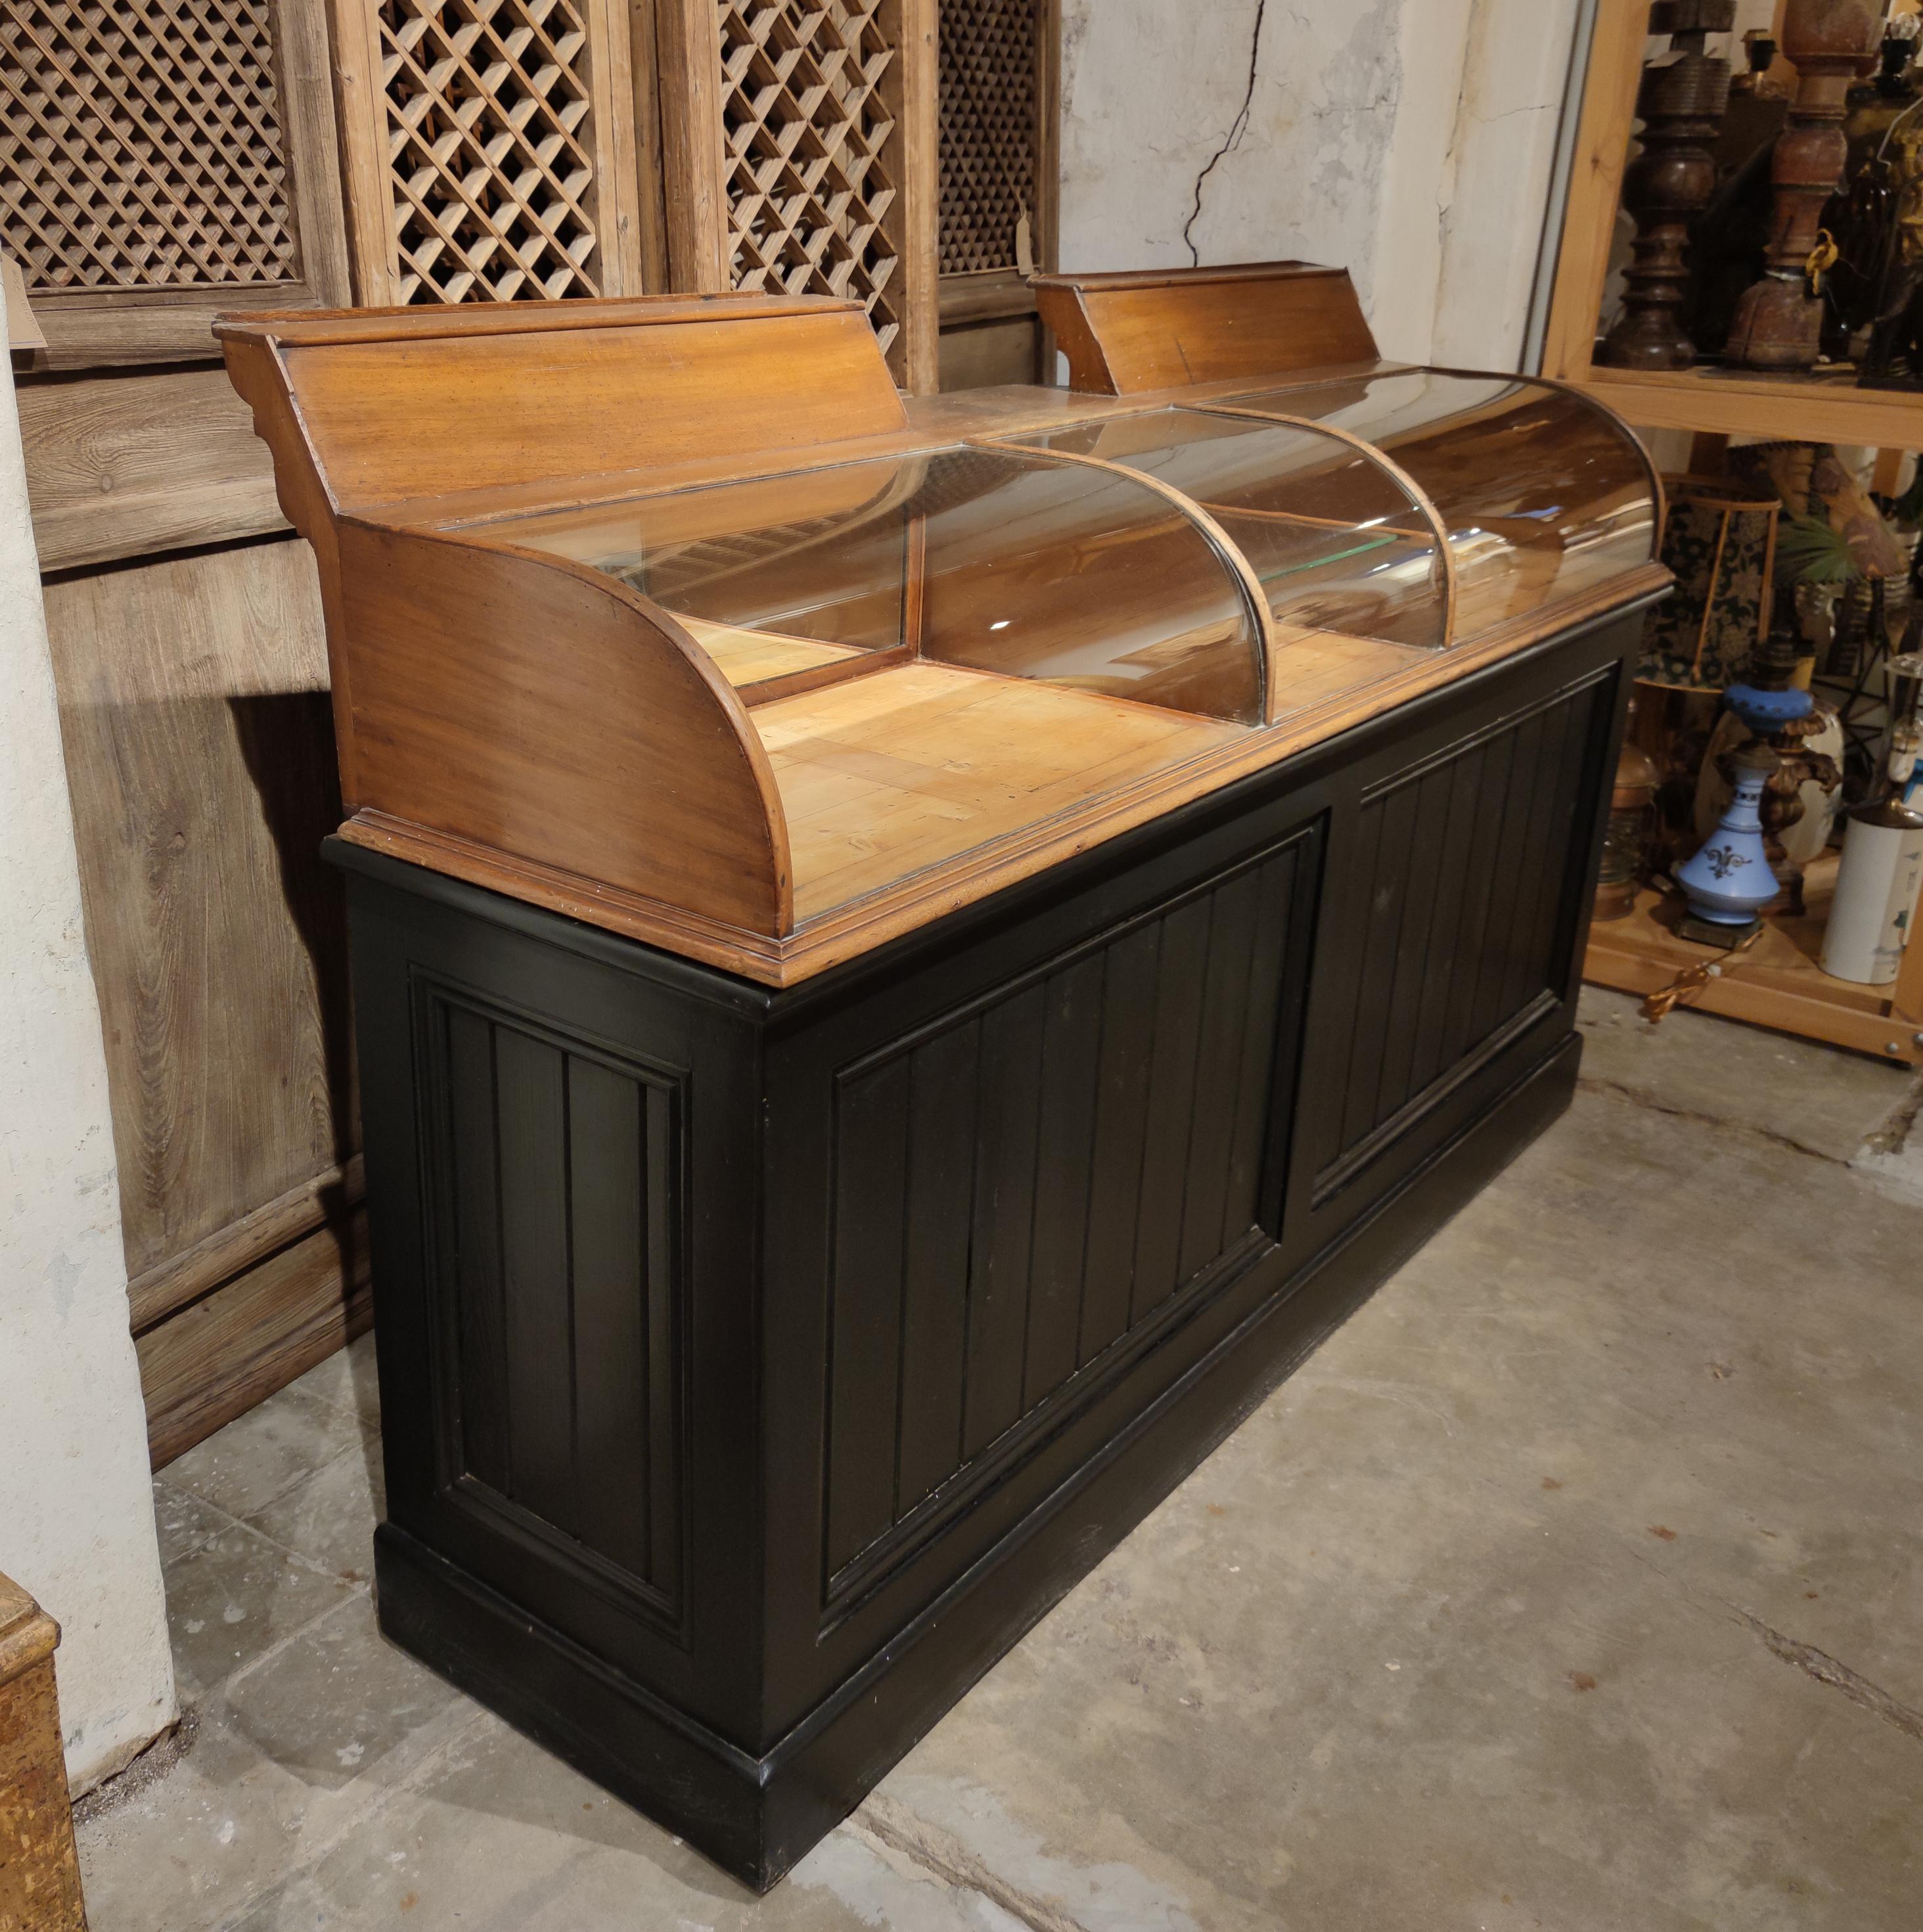 19th century French glass and wood shop counter.